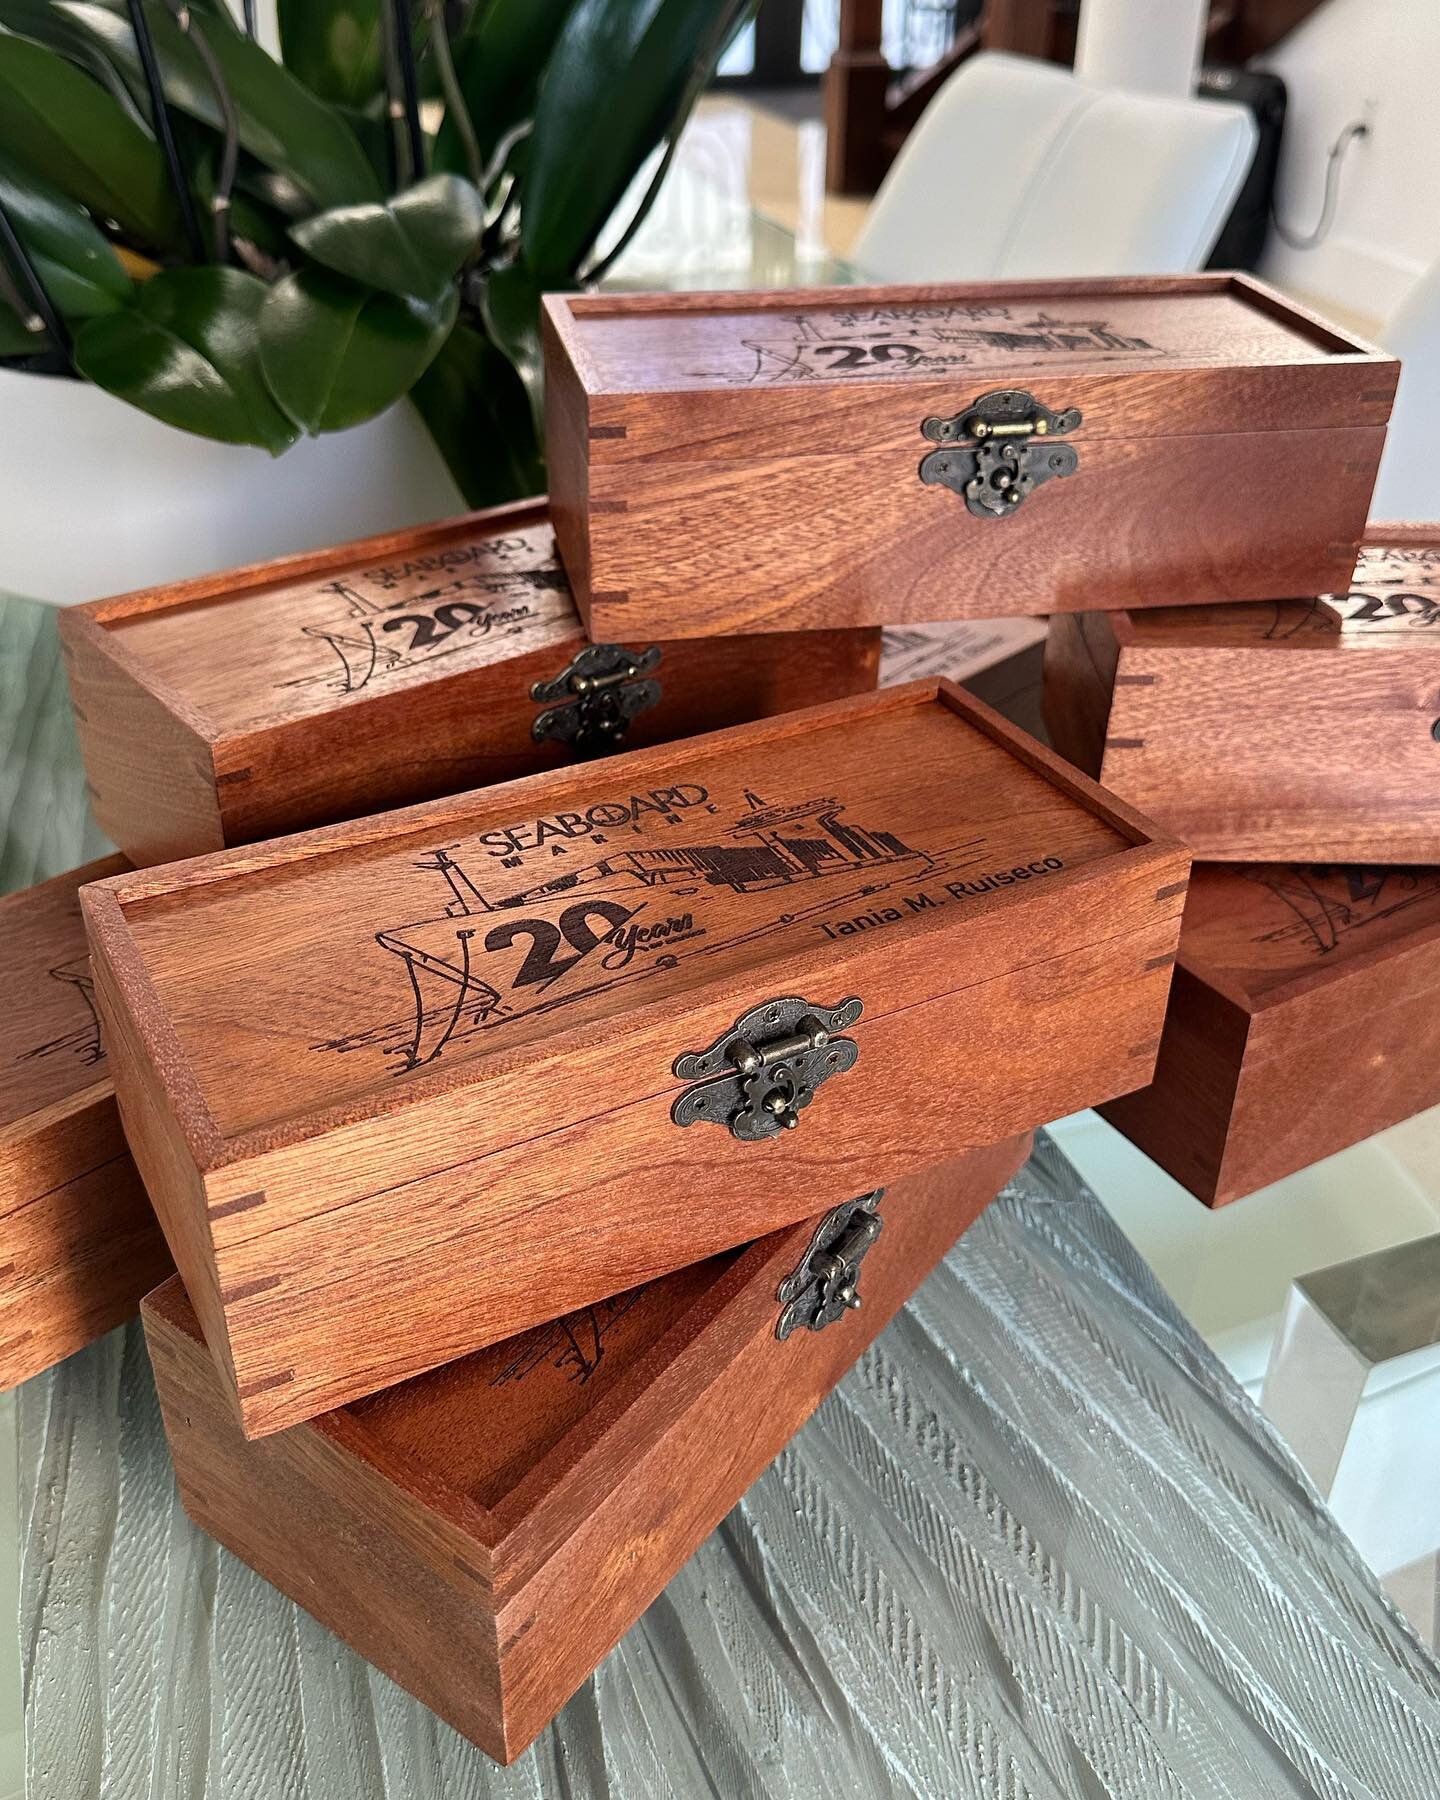 That&rsquo;s a wrap! Anniversary boxes will be delivered today! #wrap #mahogany #boxes #personalizedgifts #anniversarygift #employeeappreciation #customwoodwork #handmadegifts